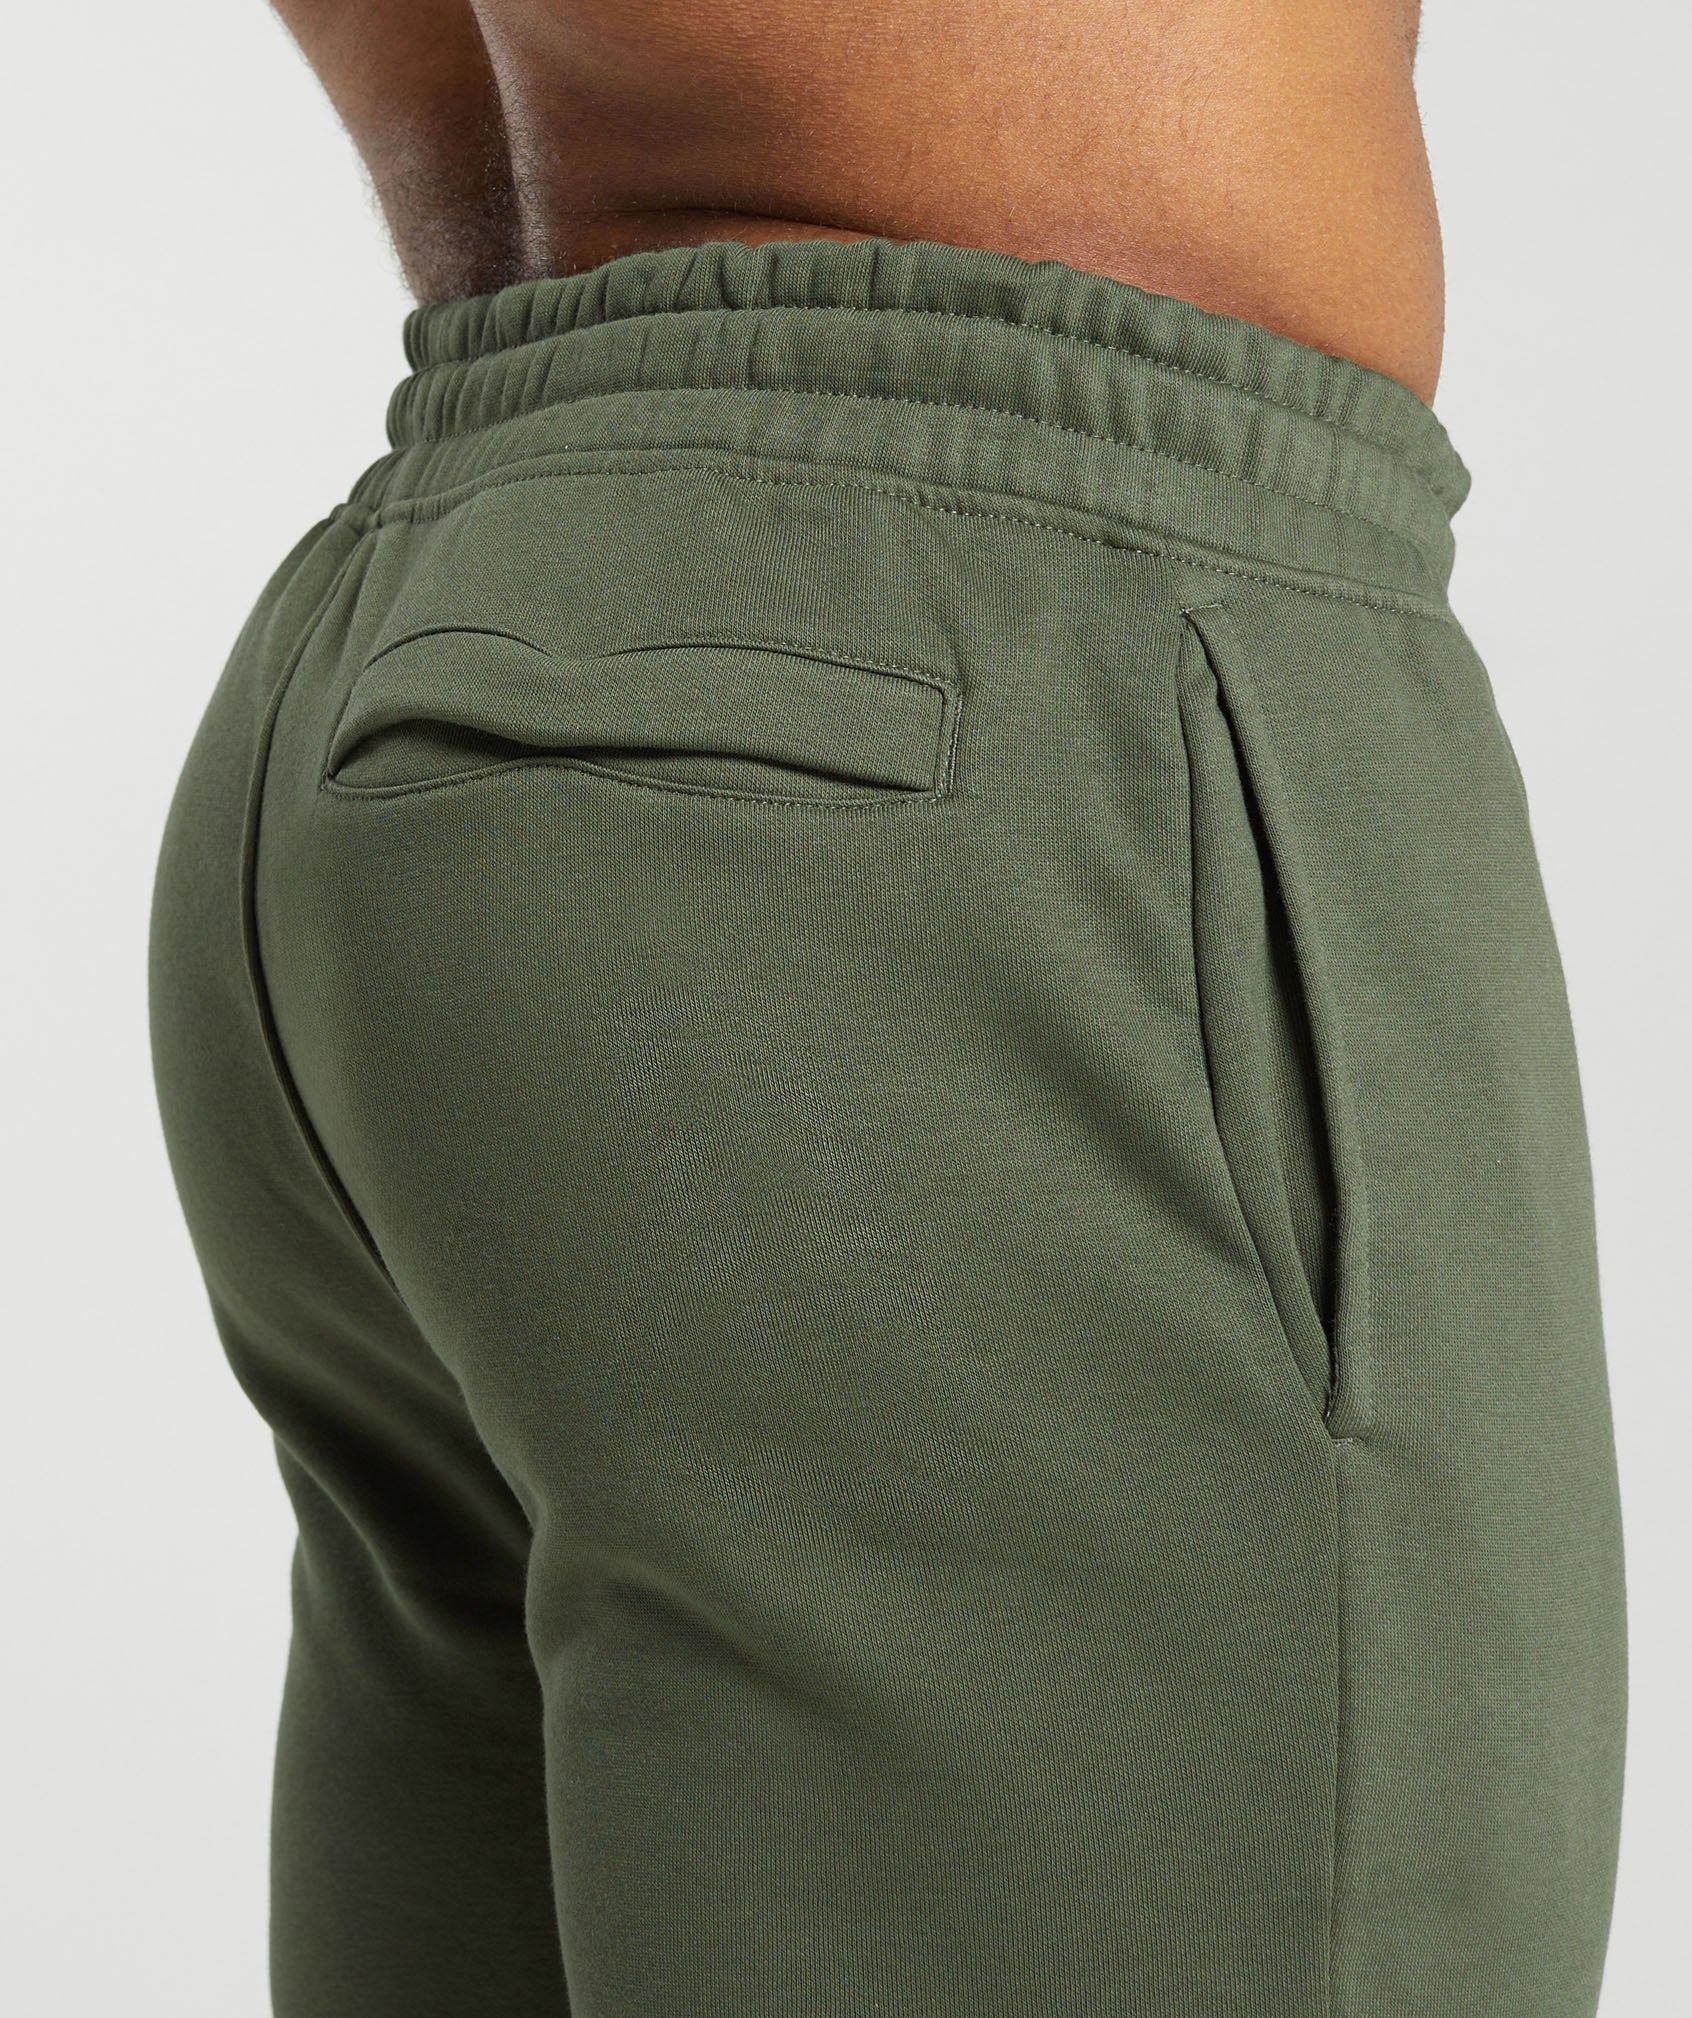 Crest Joggers in Core Olive - view 5